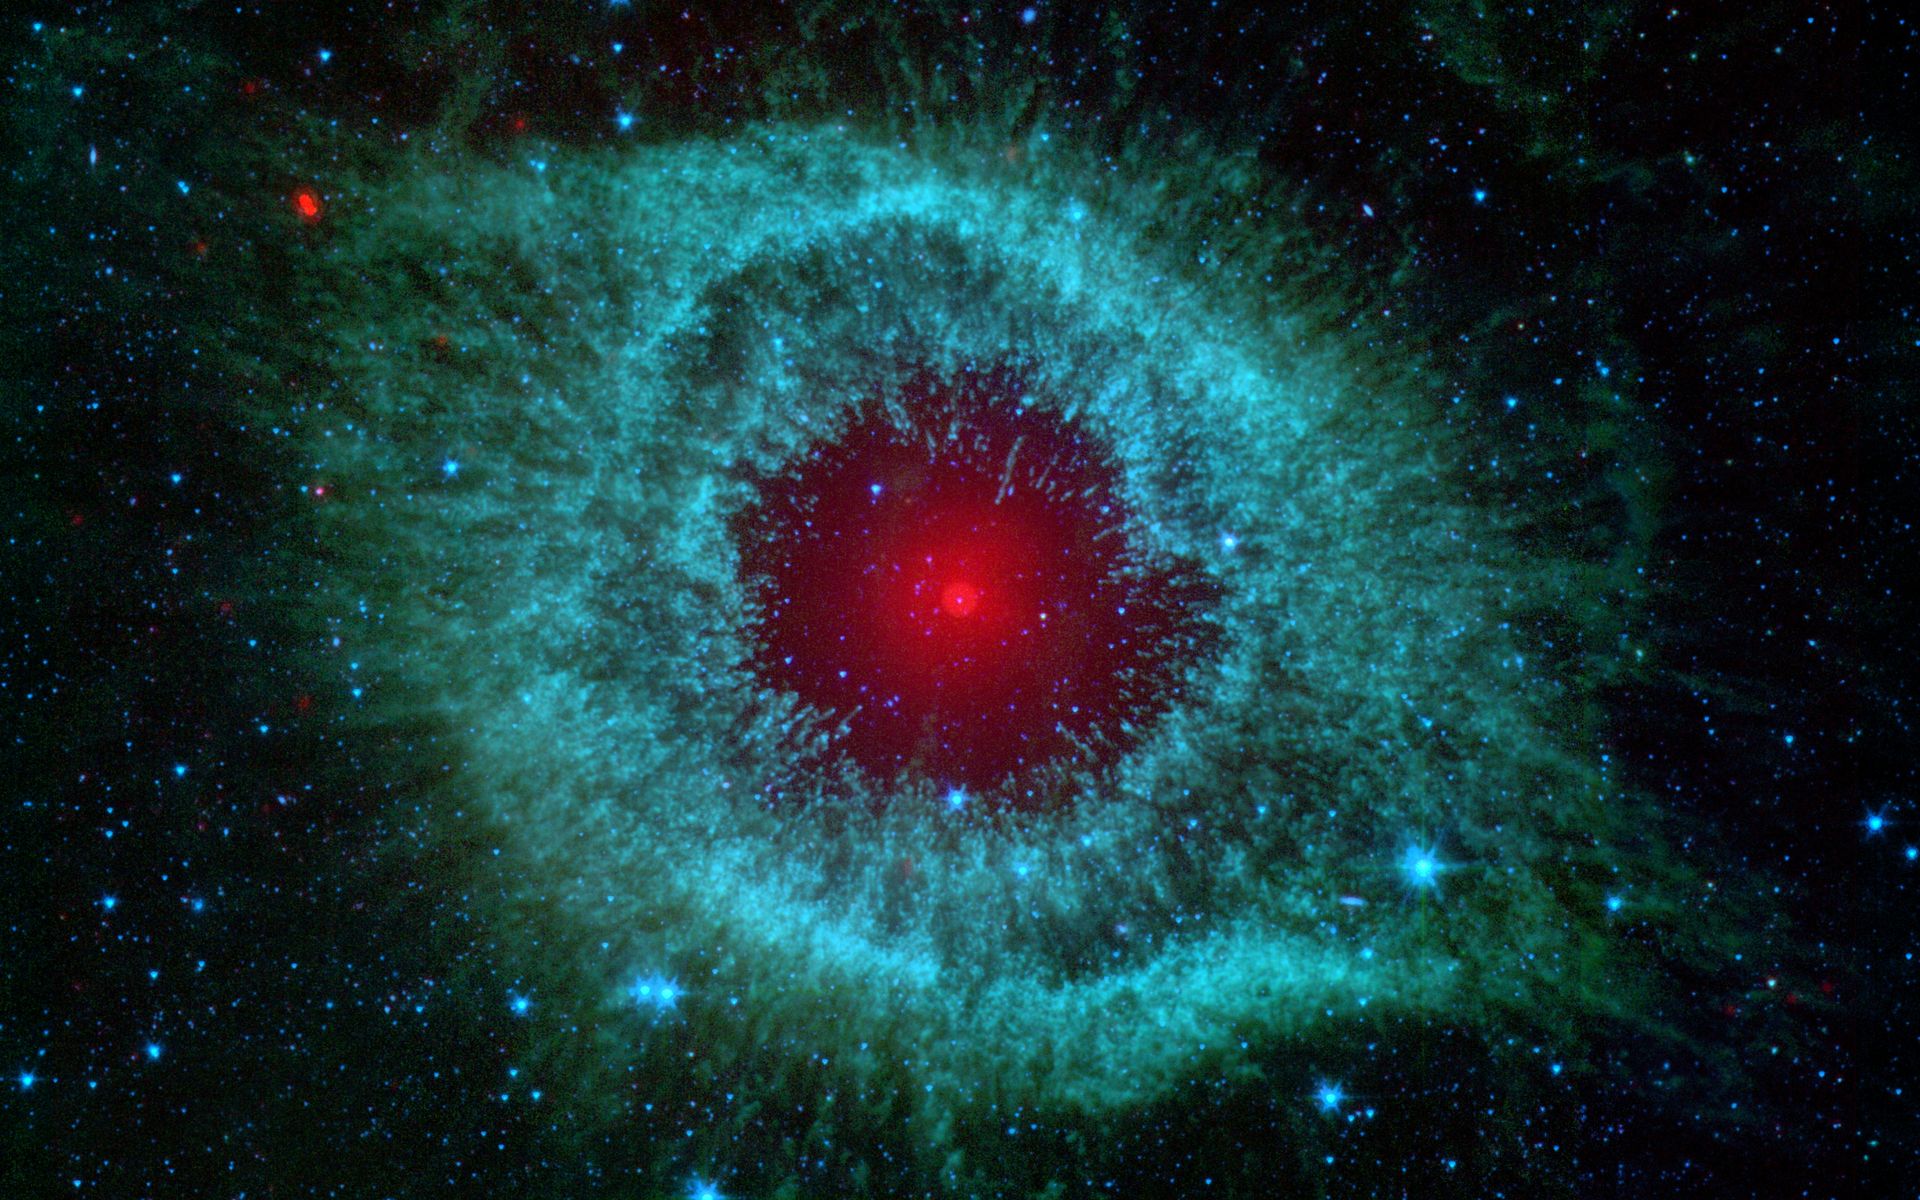 This infrared image from NASA's Spitzer Space Telescope shows the Helix nebula, a cosmic starlet